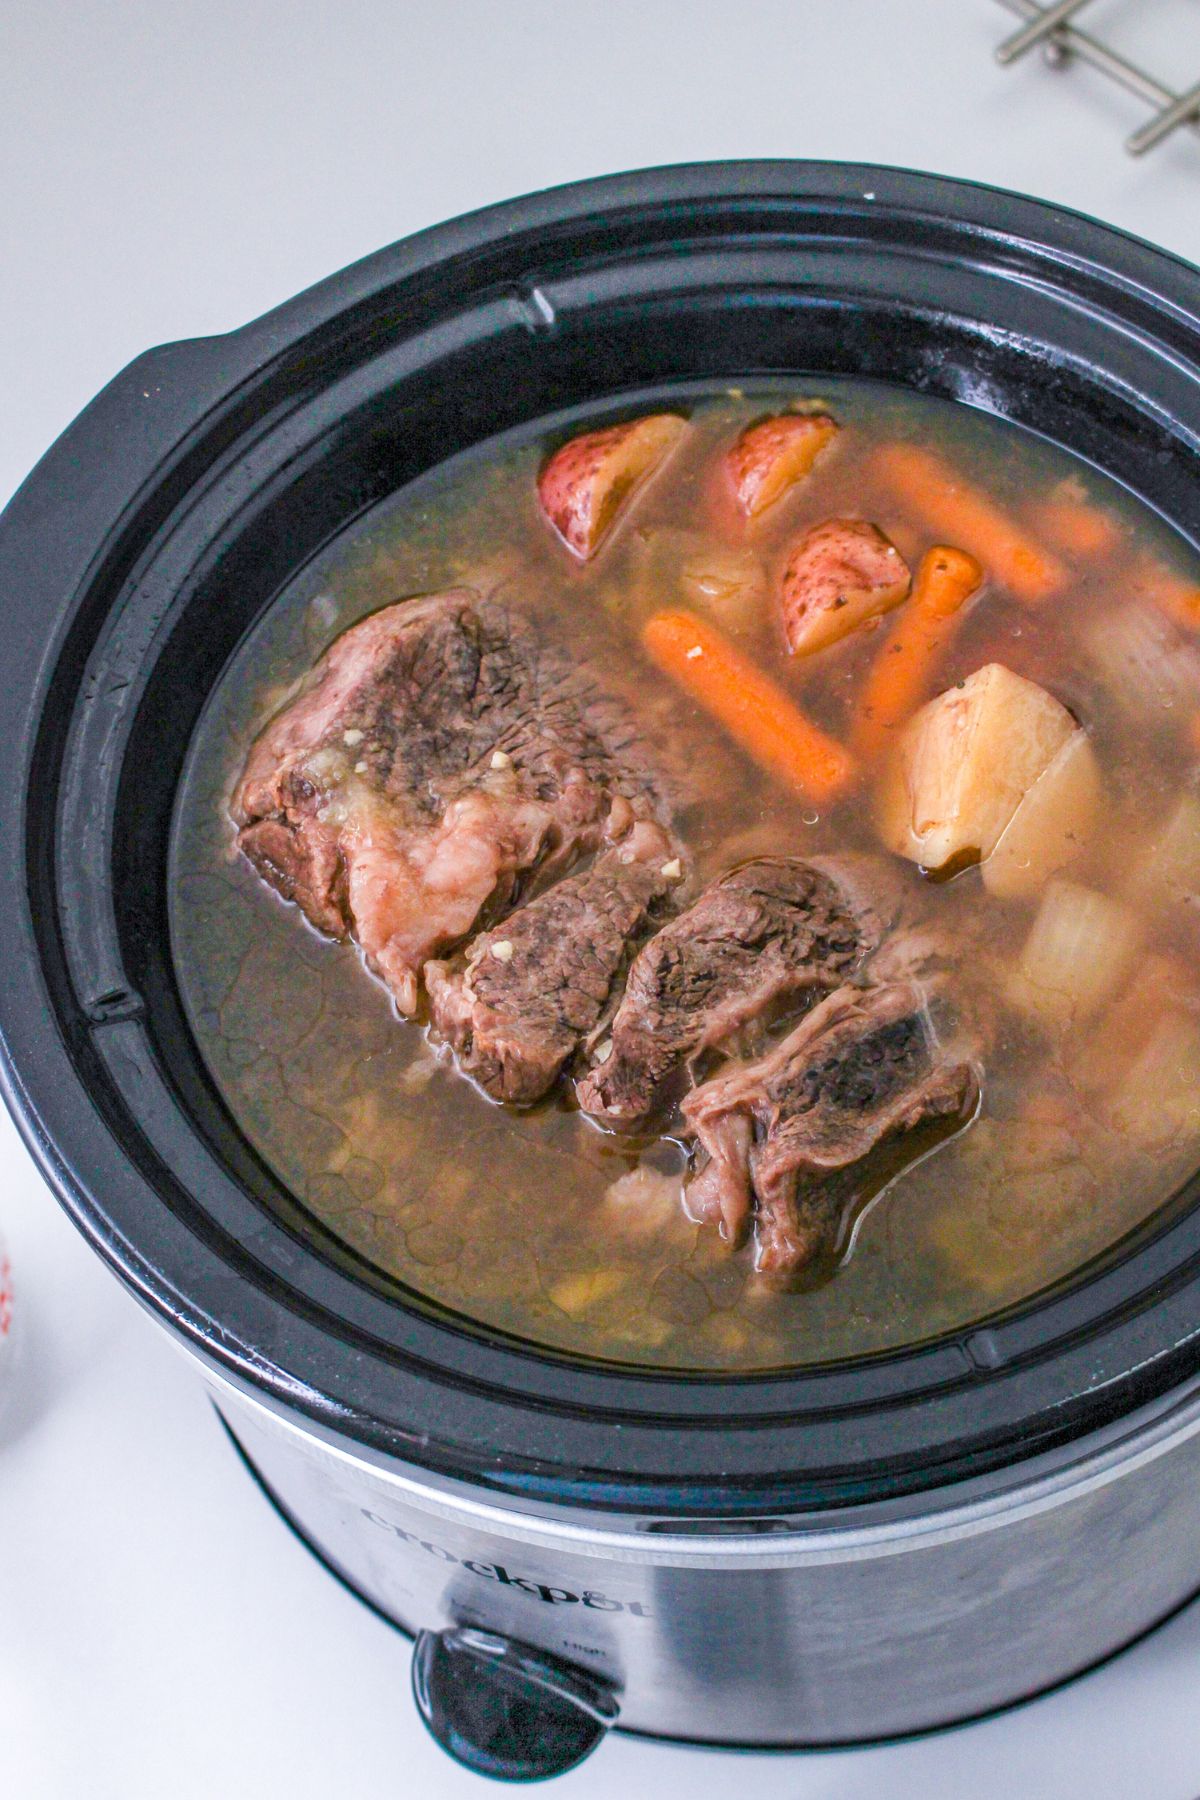 cooked pot roast, carrots, and potatoes in a slow cooker.